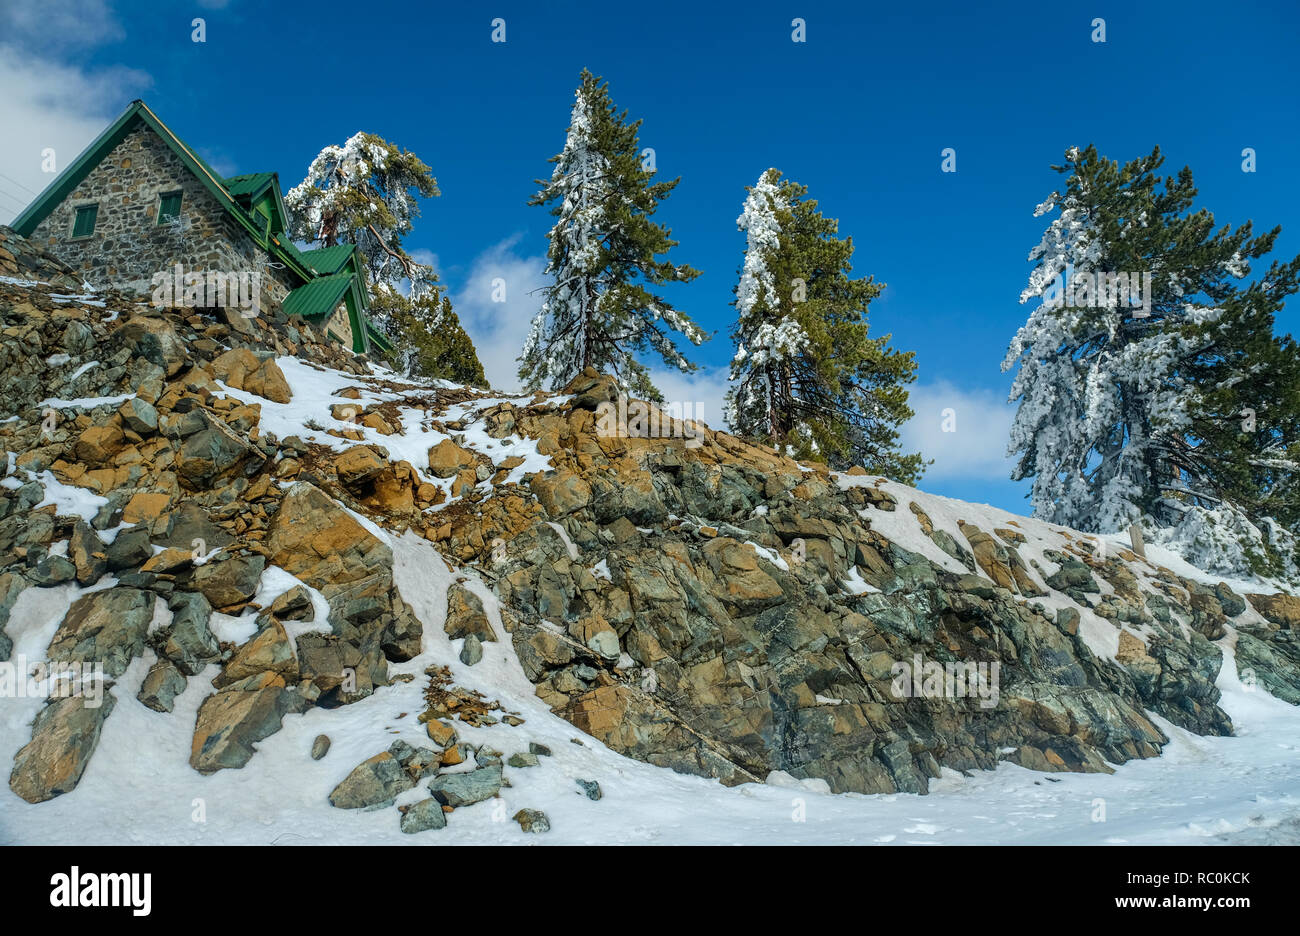 Alpine scene on the slopes of Mount Olympus in the Troodos Mountains, Cyprus. Stock Photo